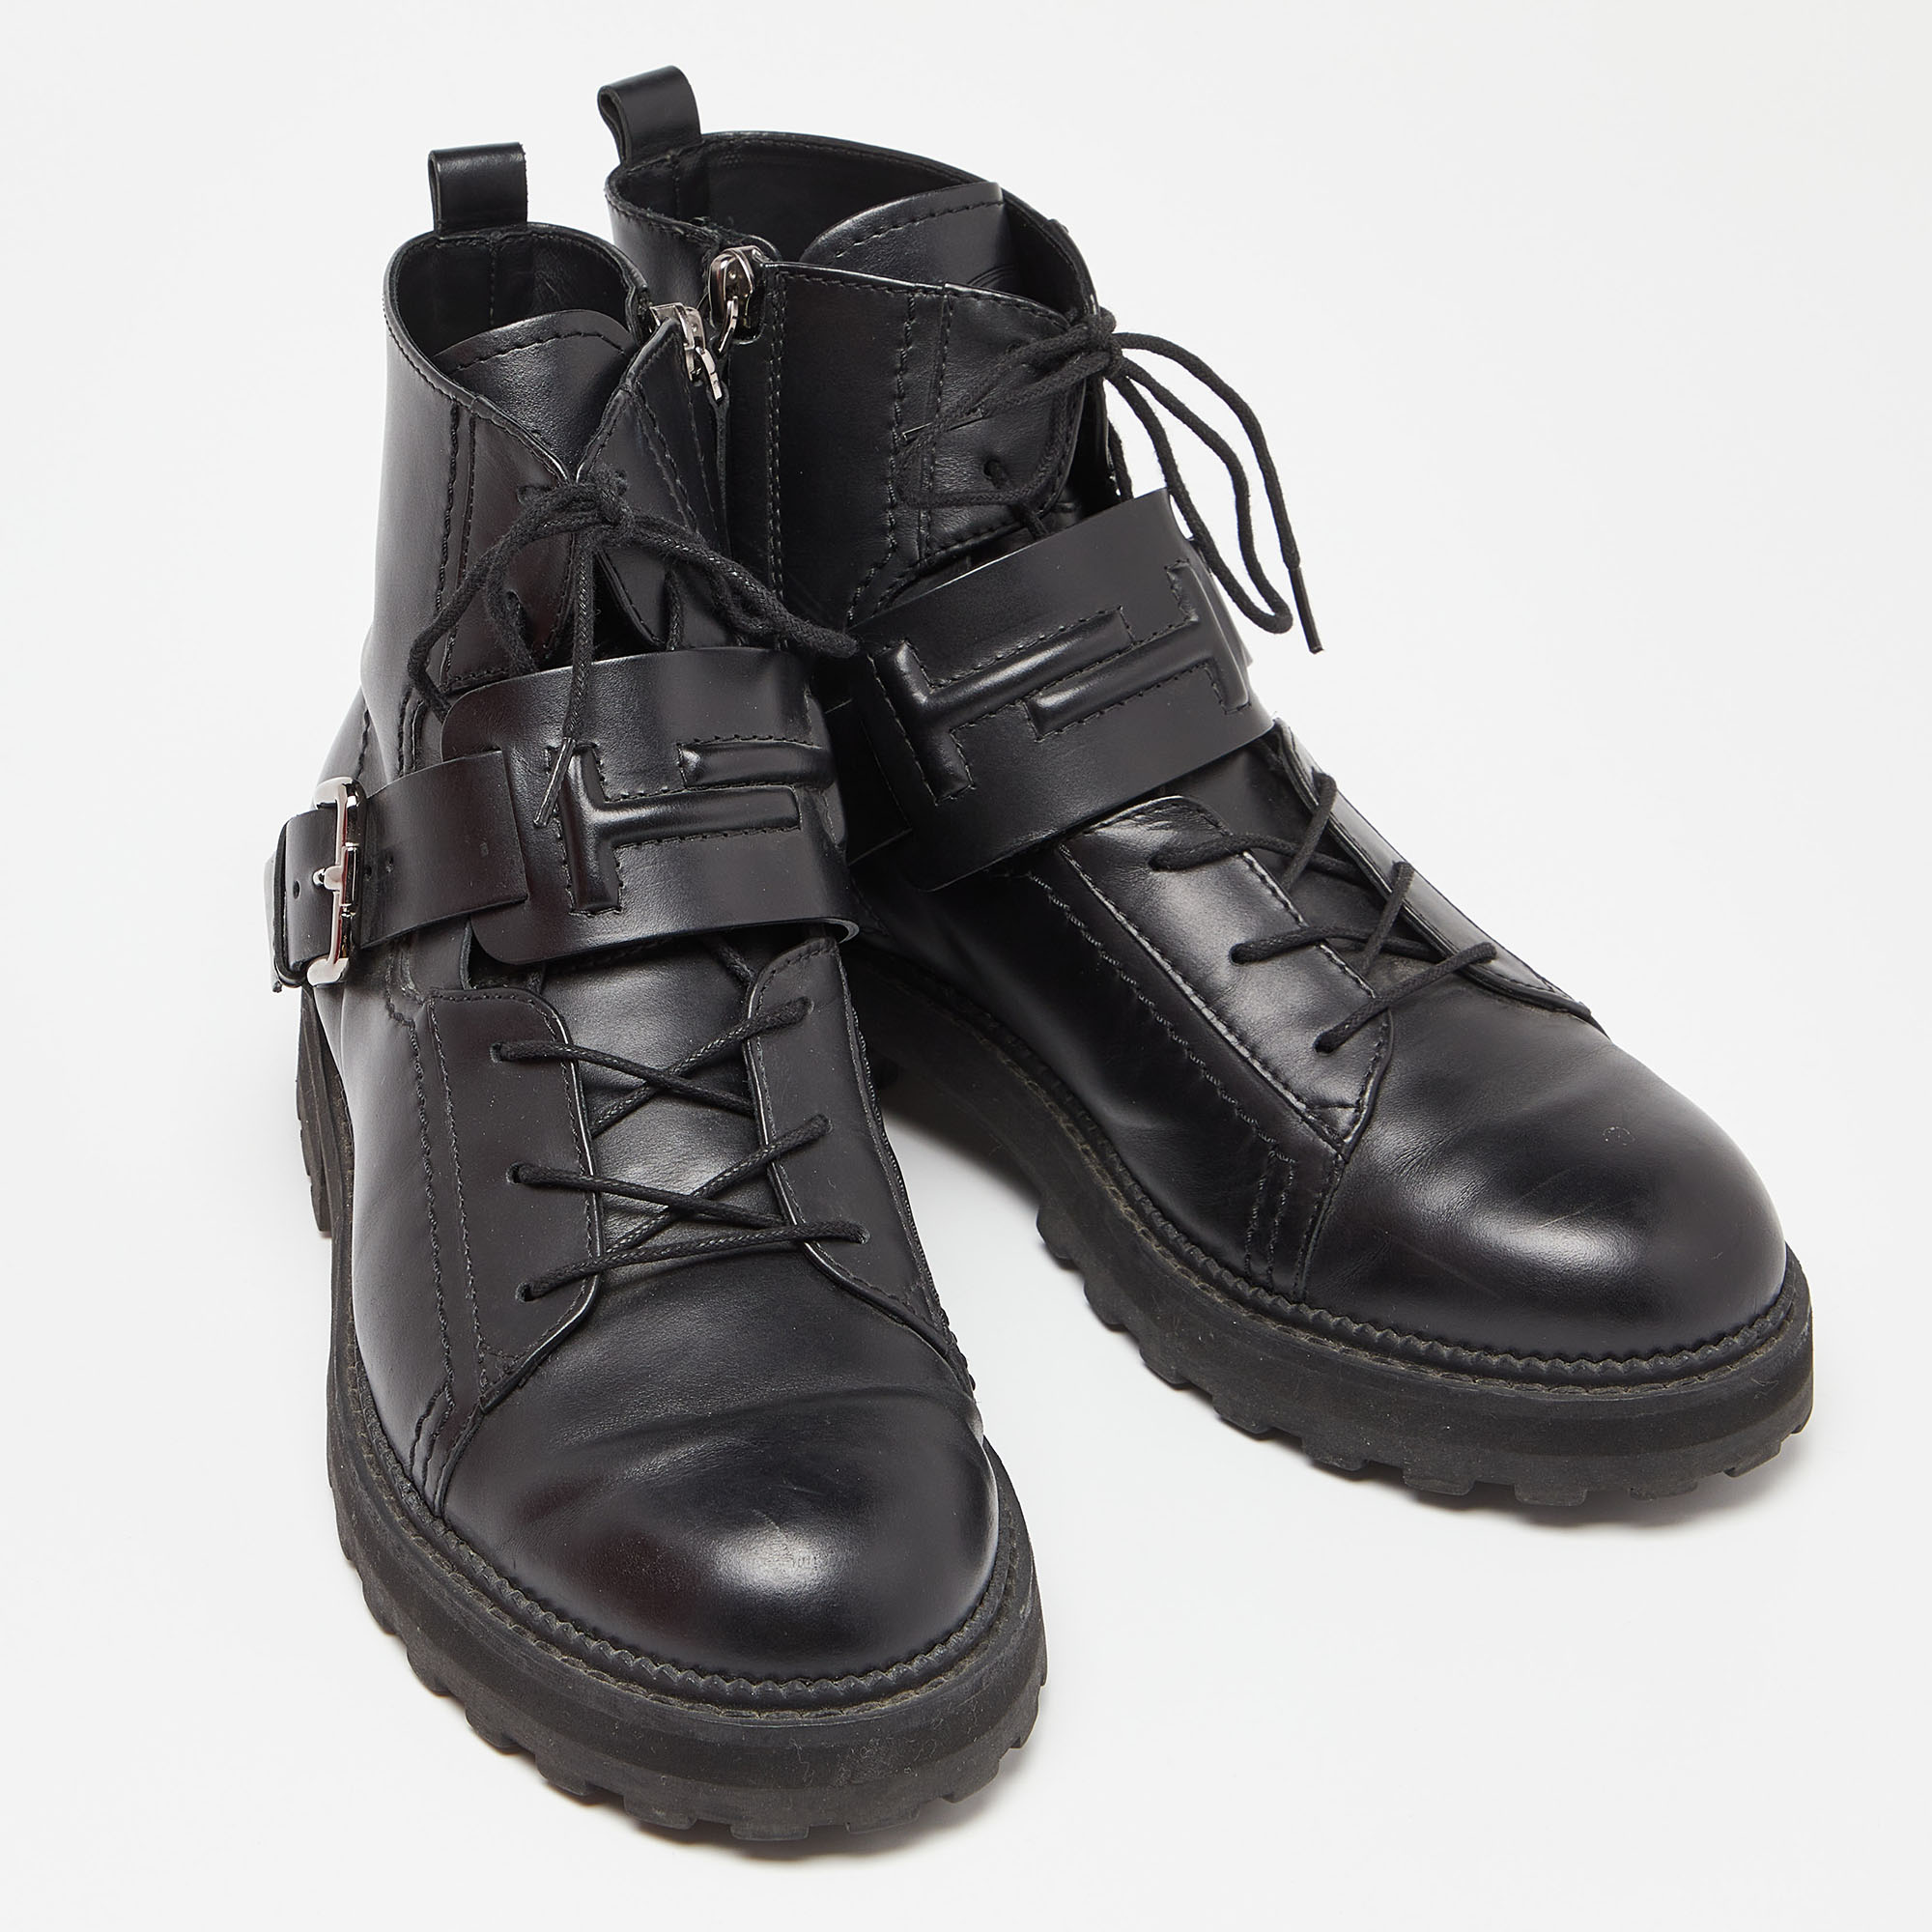 Tod's Black Leather Buckle Combat Boots Size 39